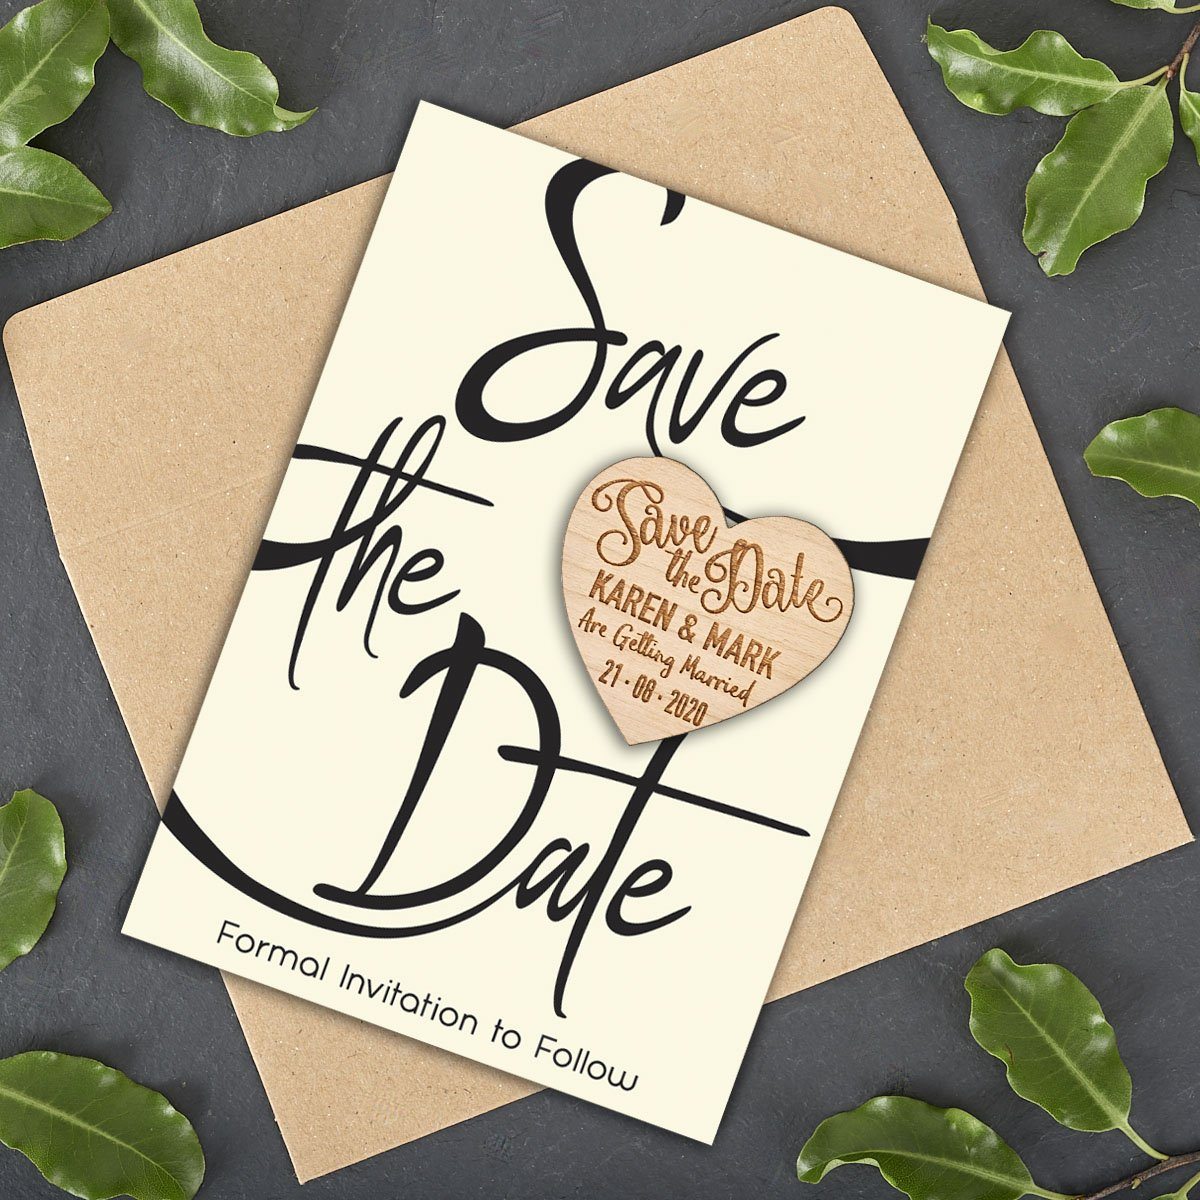 Save The Date Magnet With Cards - Save The Date Magnet Wooden Rustic - Simple Design